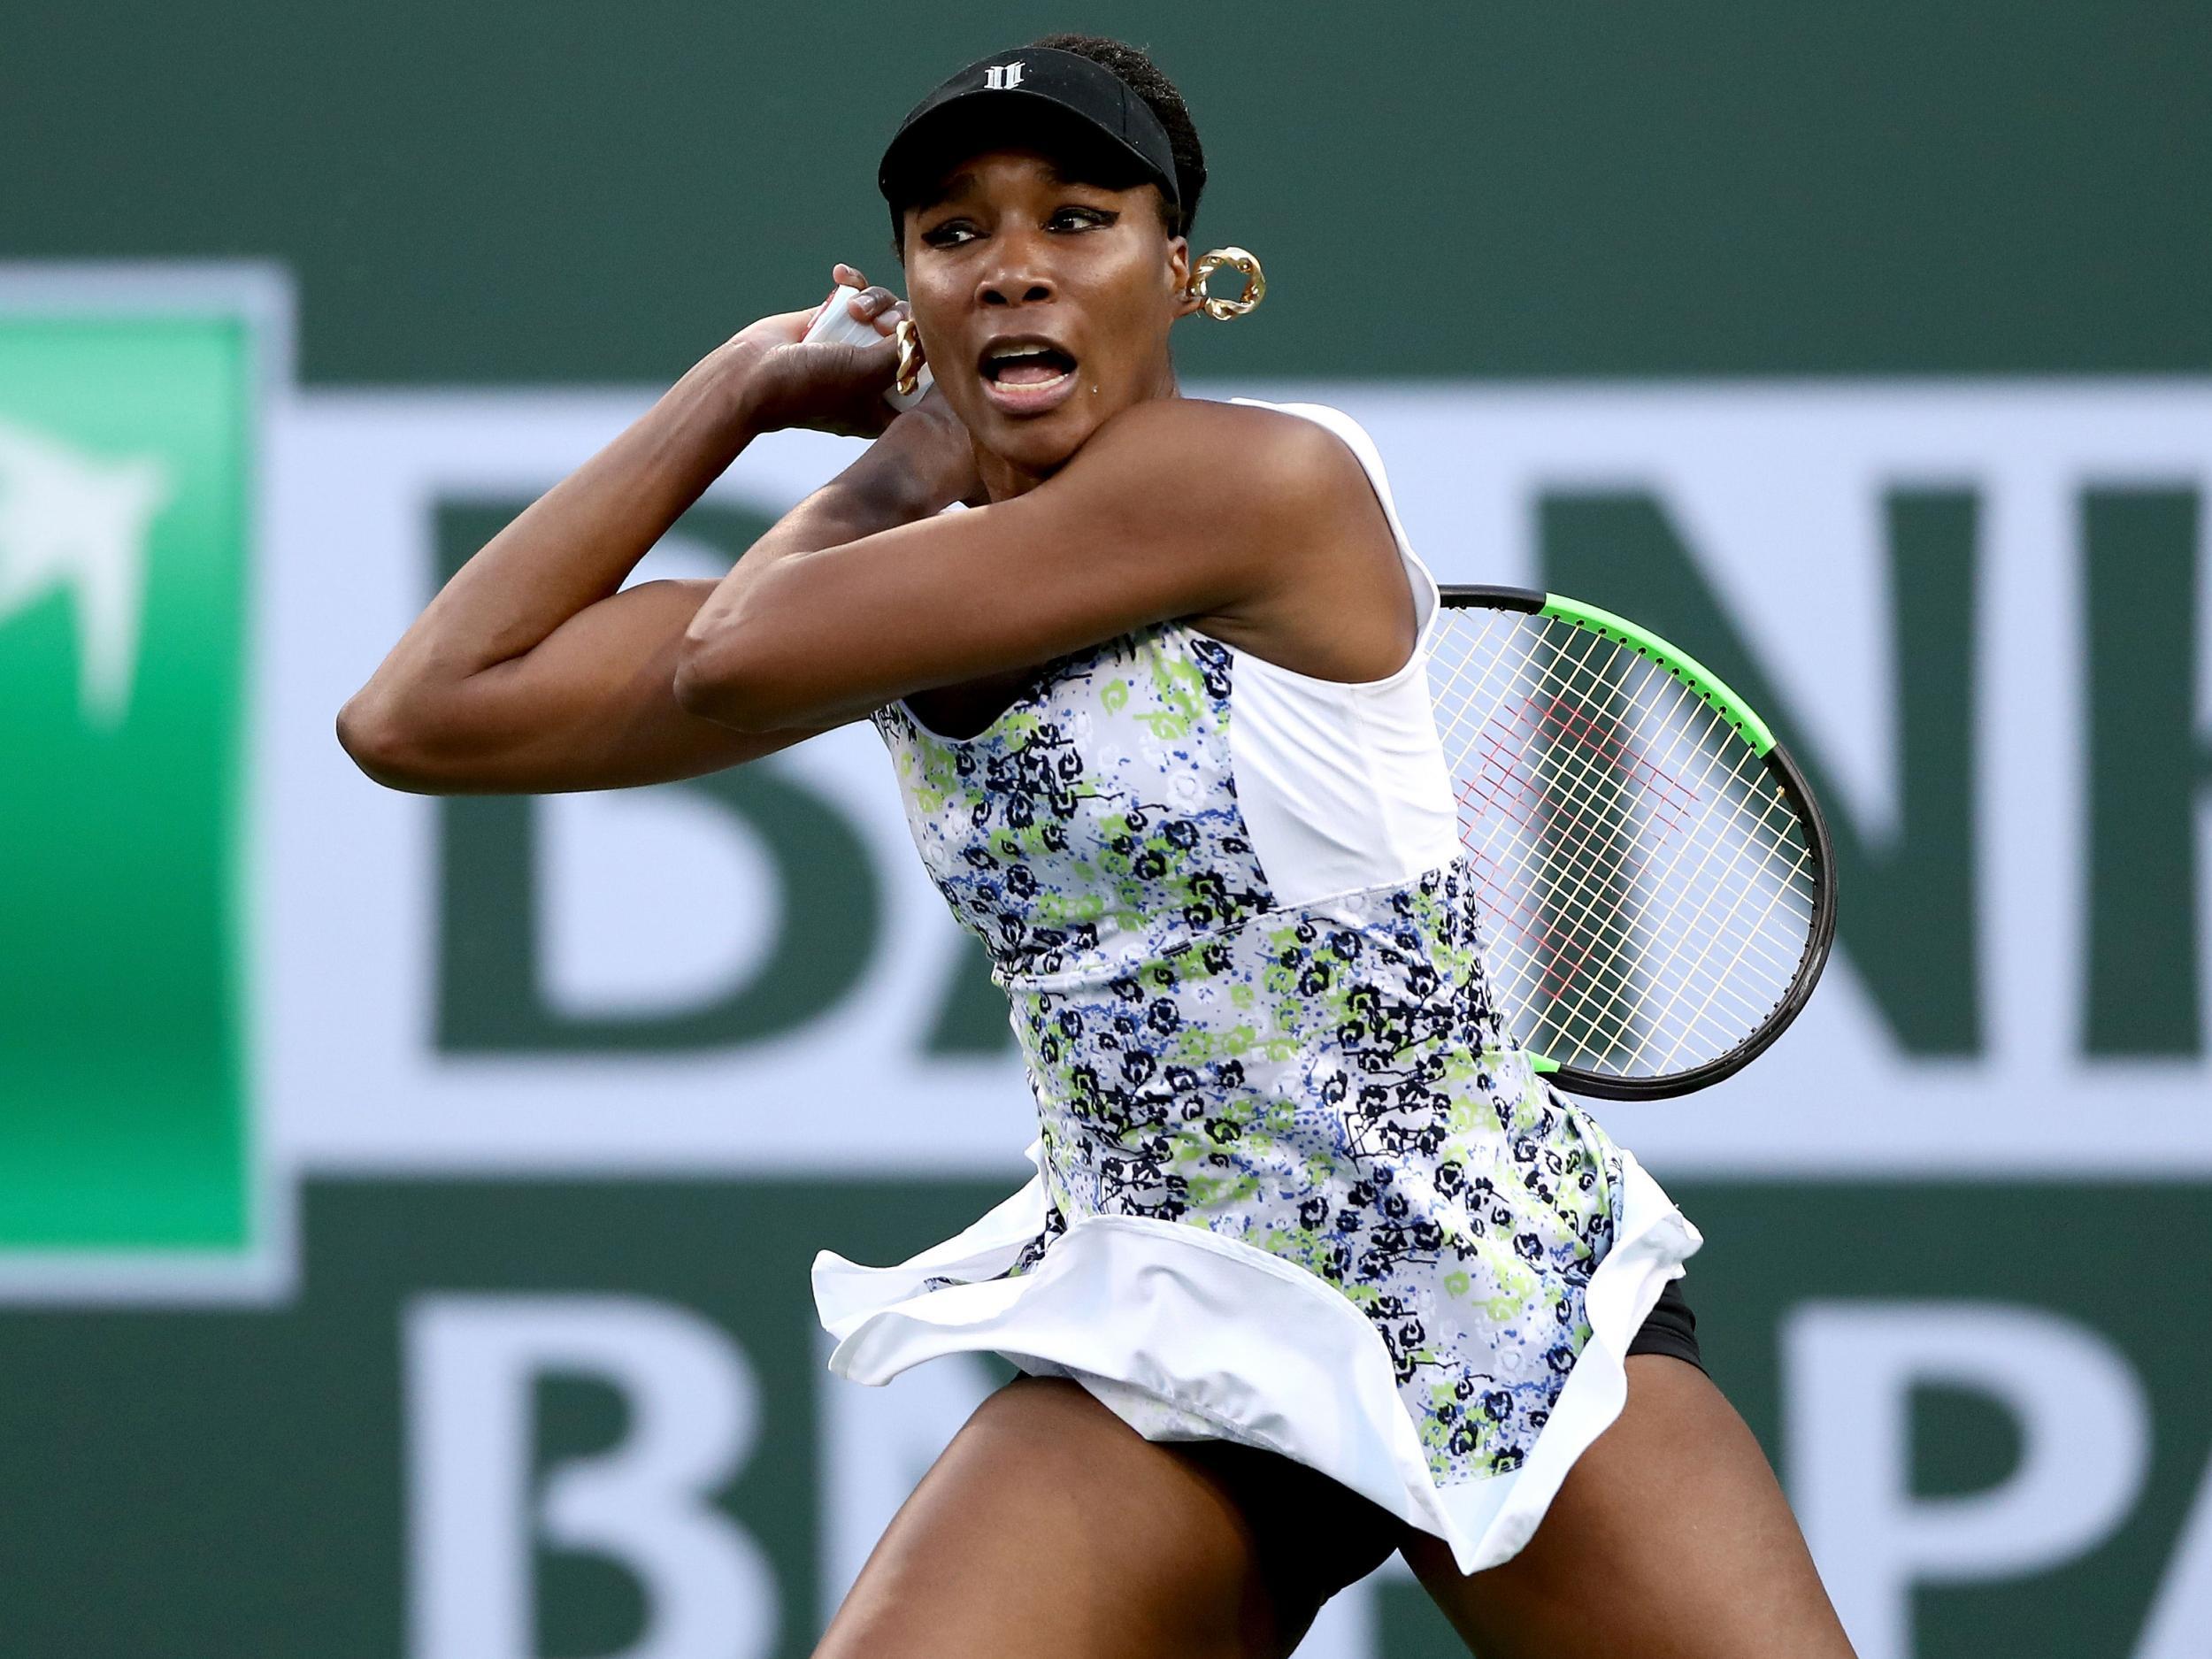 Venus Williams is into the last four in Indian Wells